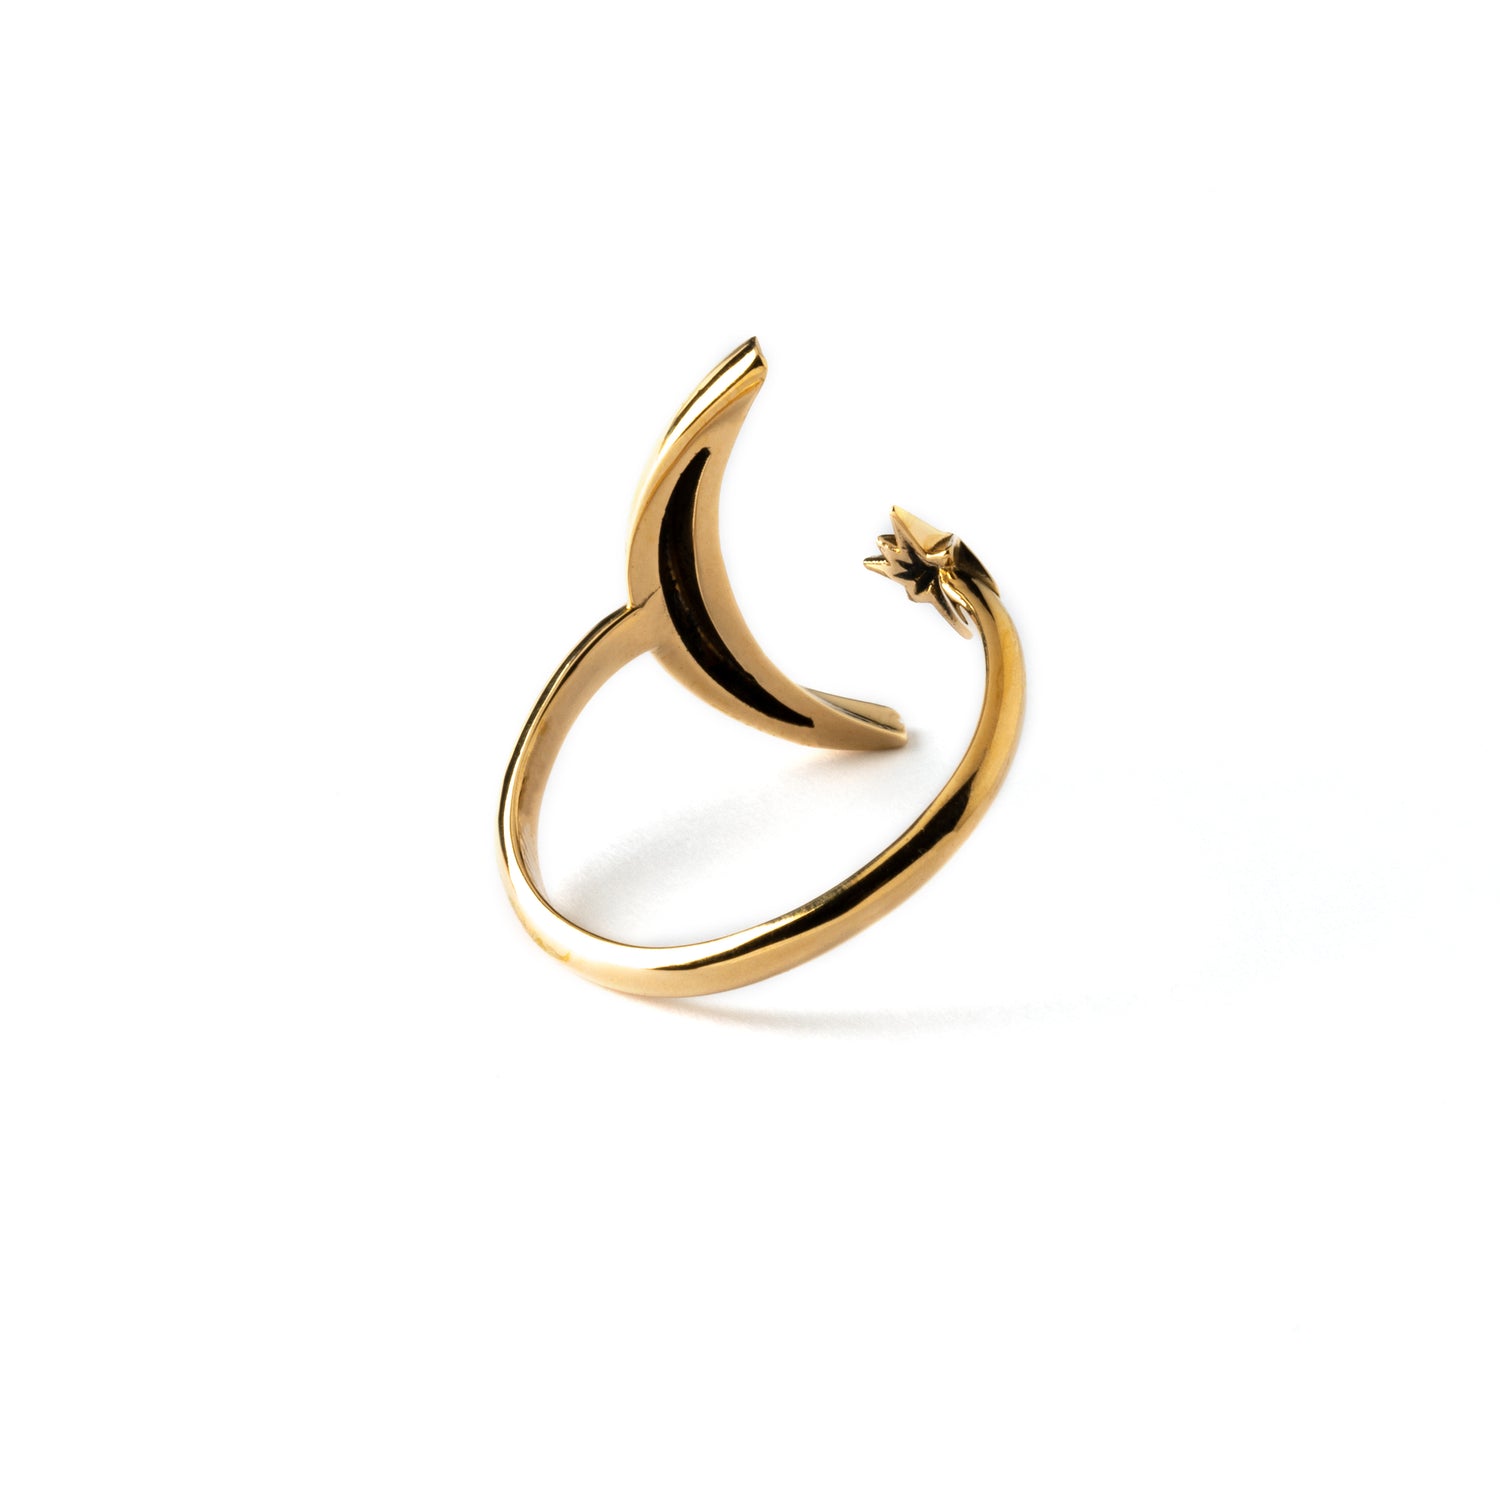 bronze open band ring with crescent moon on one side and star at the other side back view